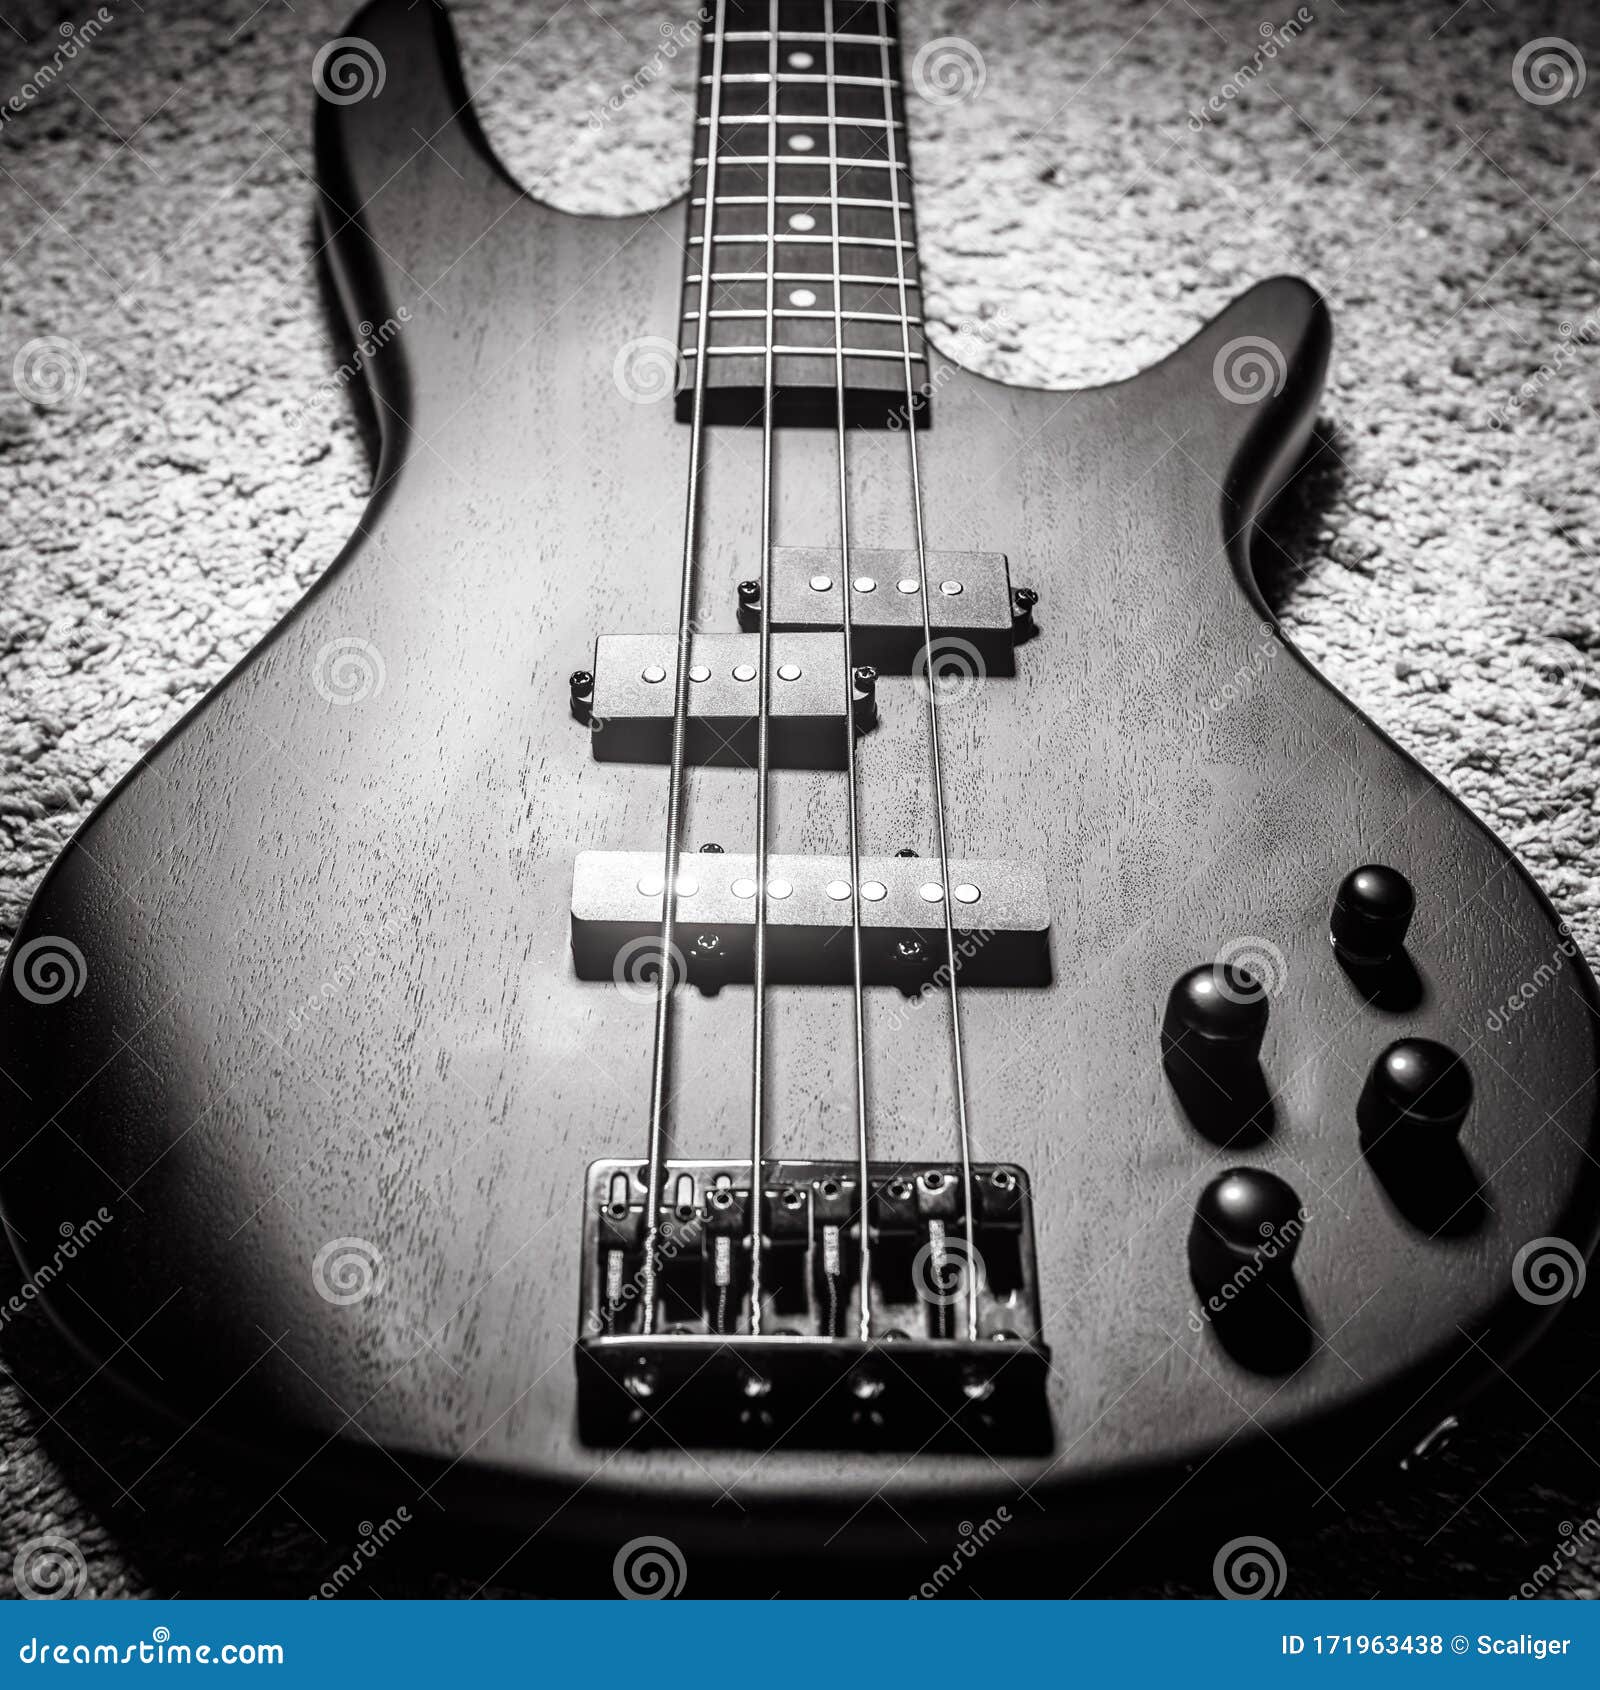 bass electric guitar with four strings in black and white. popular rock musical instrument. top view of bass guitar, focus on